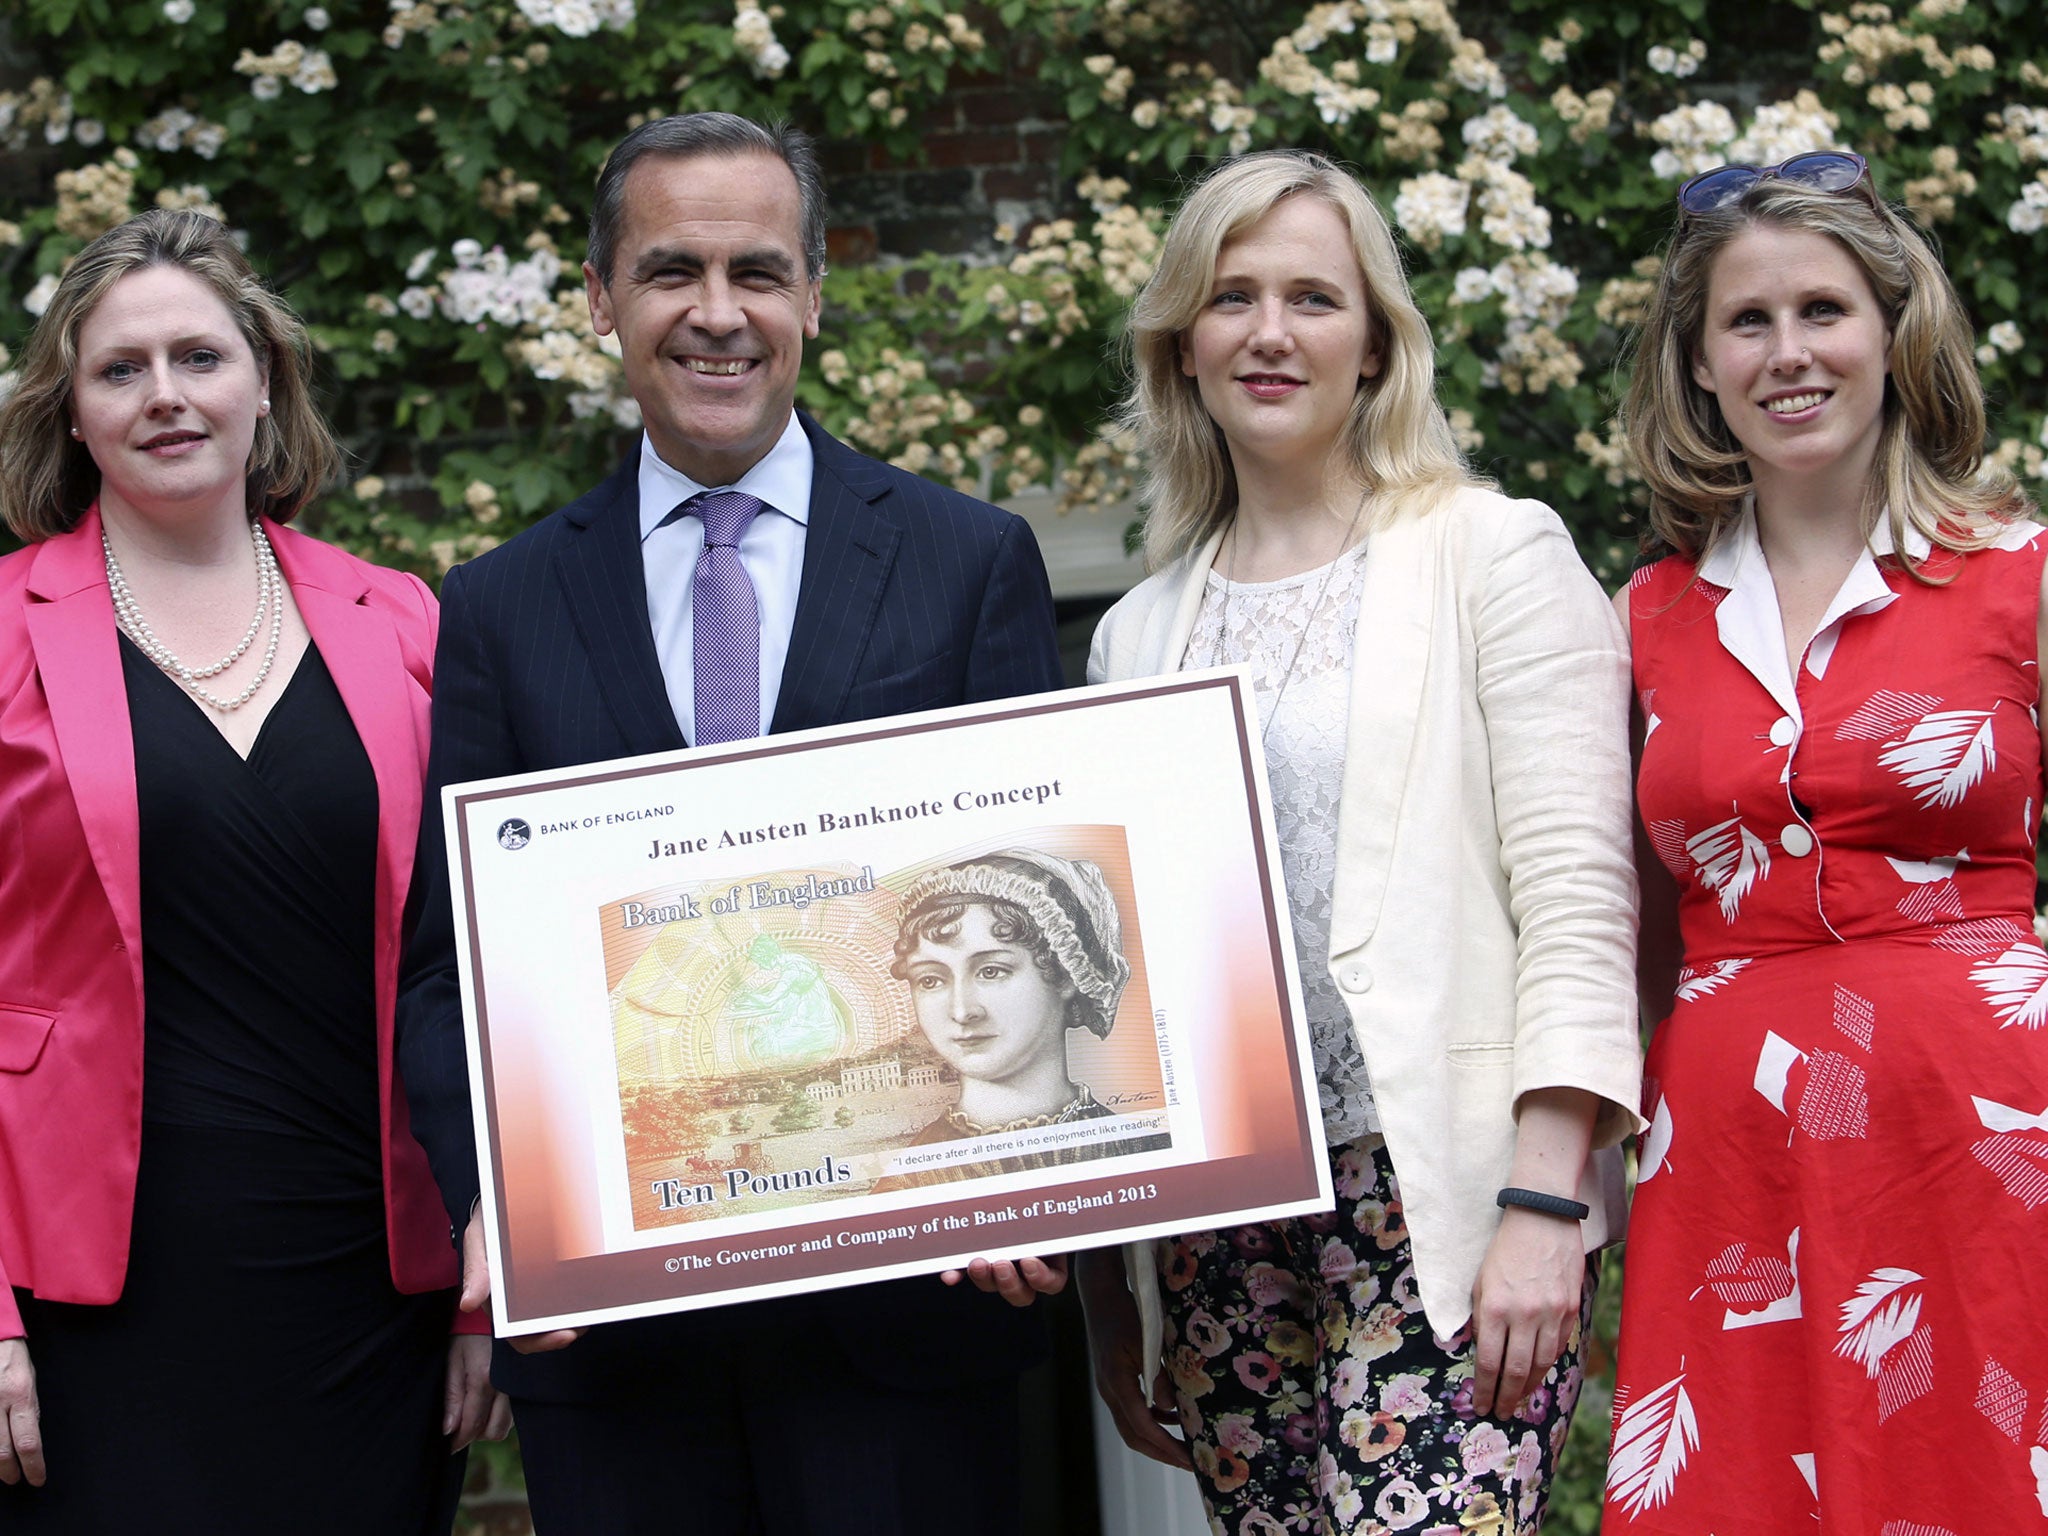 (From left) Mary Macleod, a Conservative MP, Governor of the Bank of England, Mark Carney, Stella Creasy, a Labour MP, and Caroline Criado-Perez, co-founder of the Women's Room, pose at the Jane Austen House Museum on July 24, 2013.